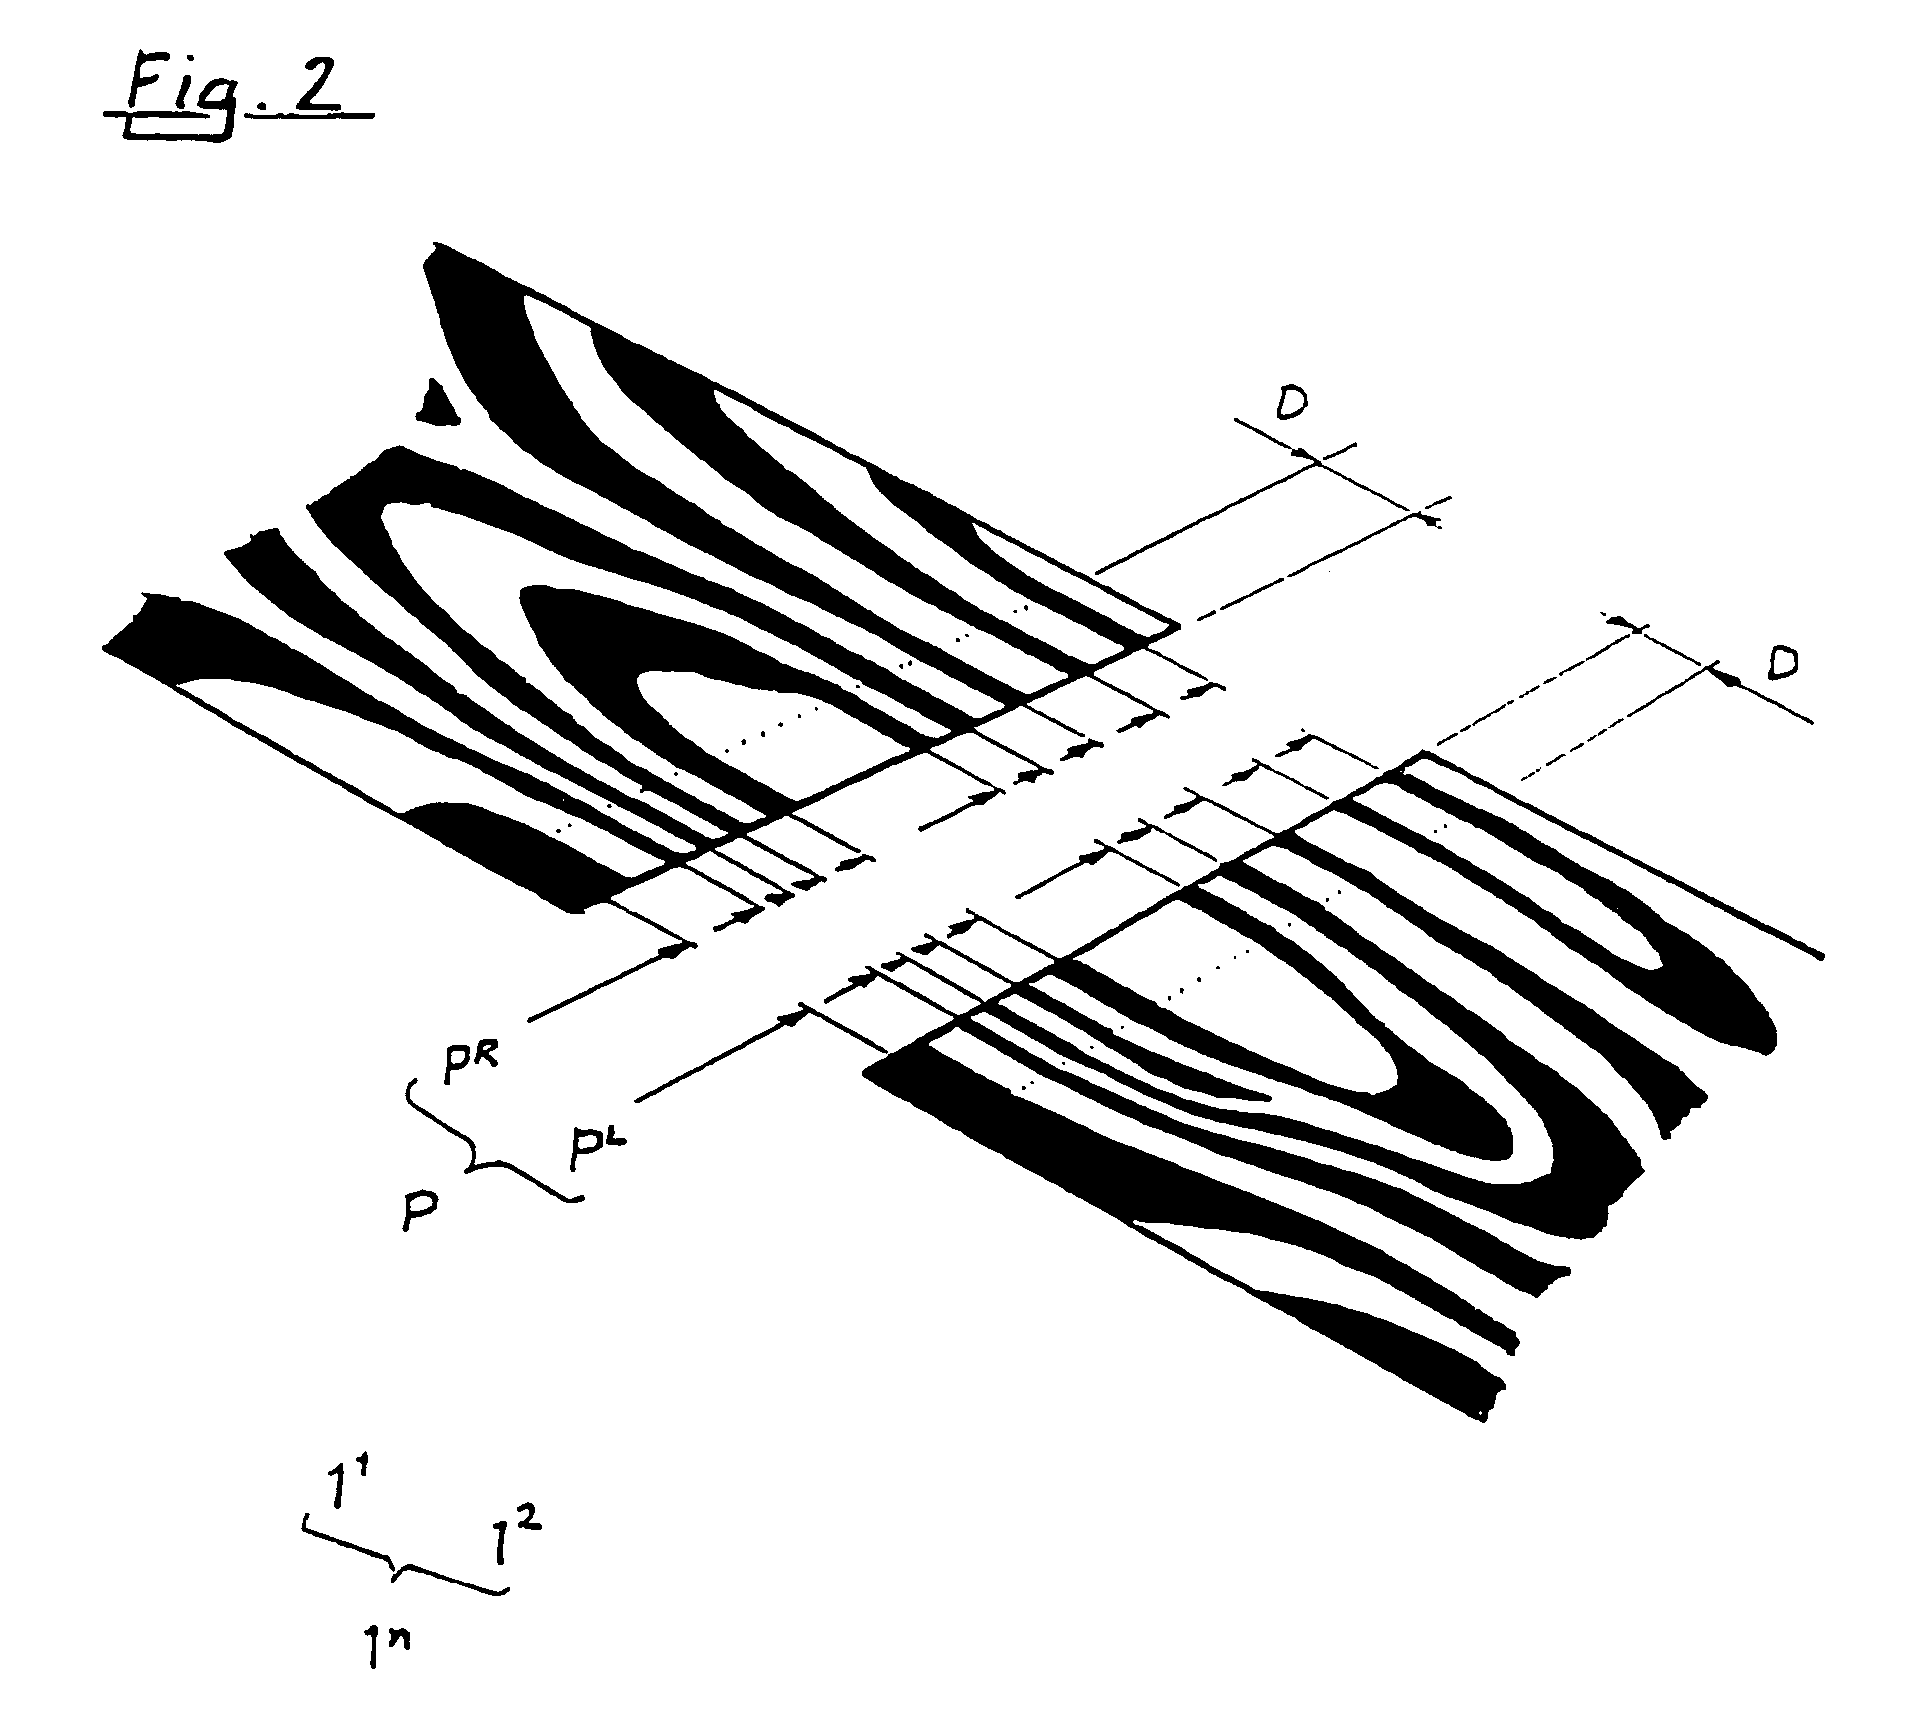 Process for the manufacturing of panels having a decorative surface